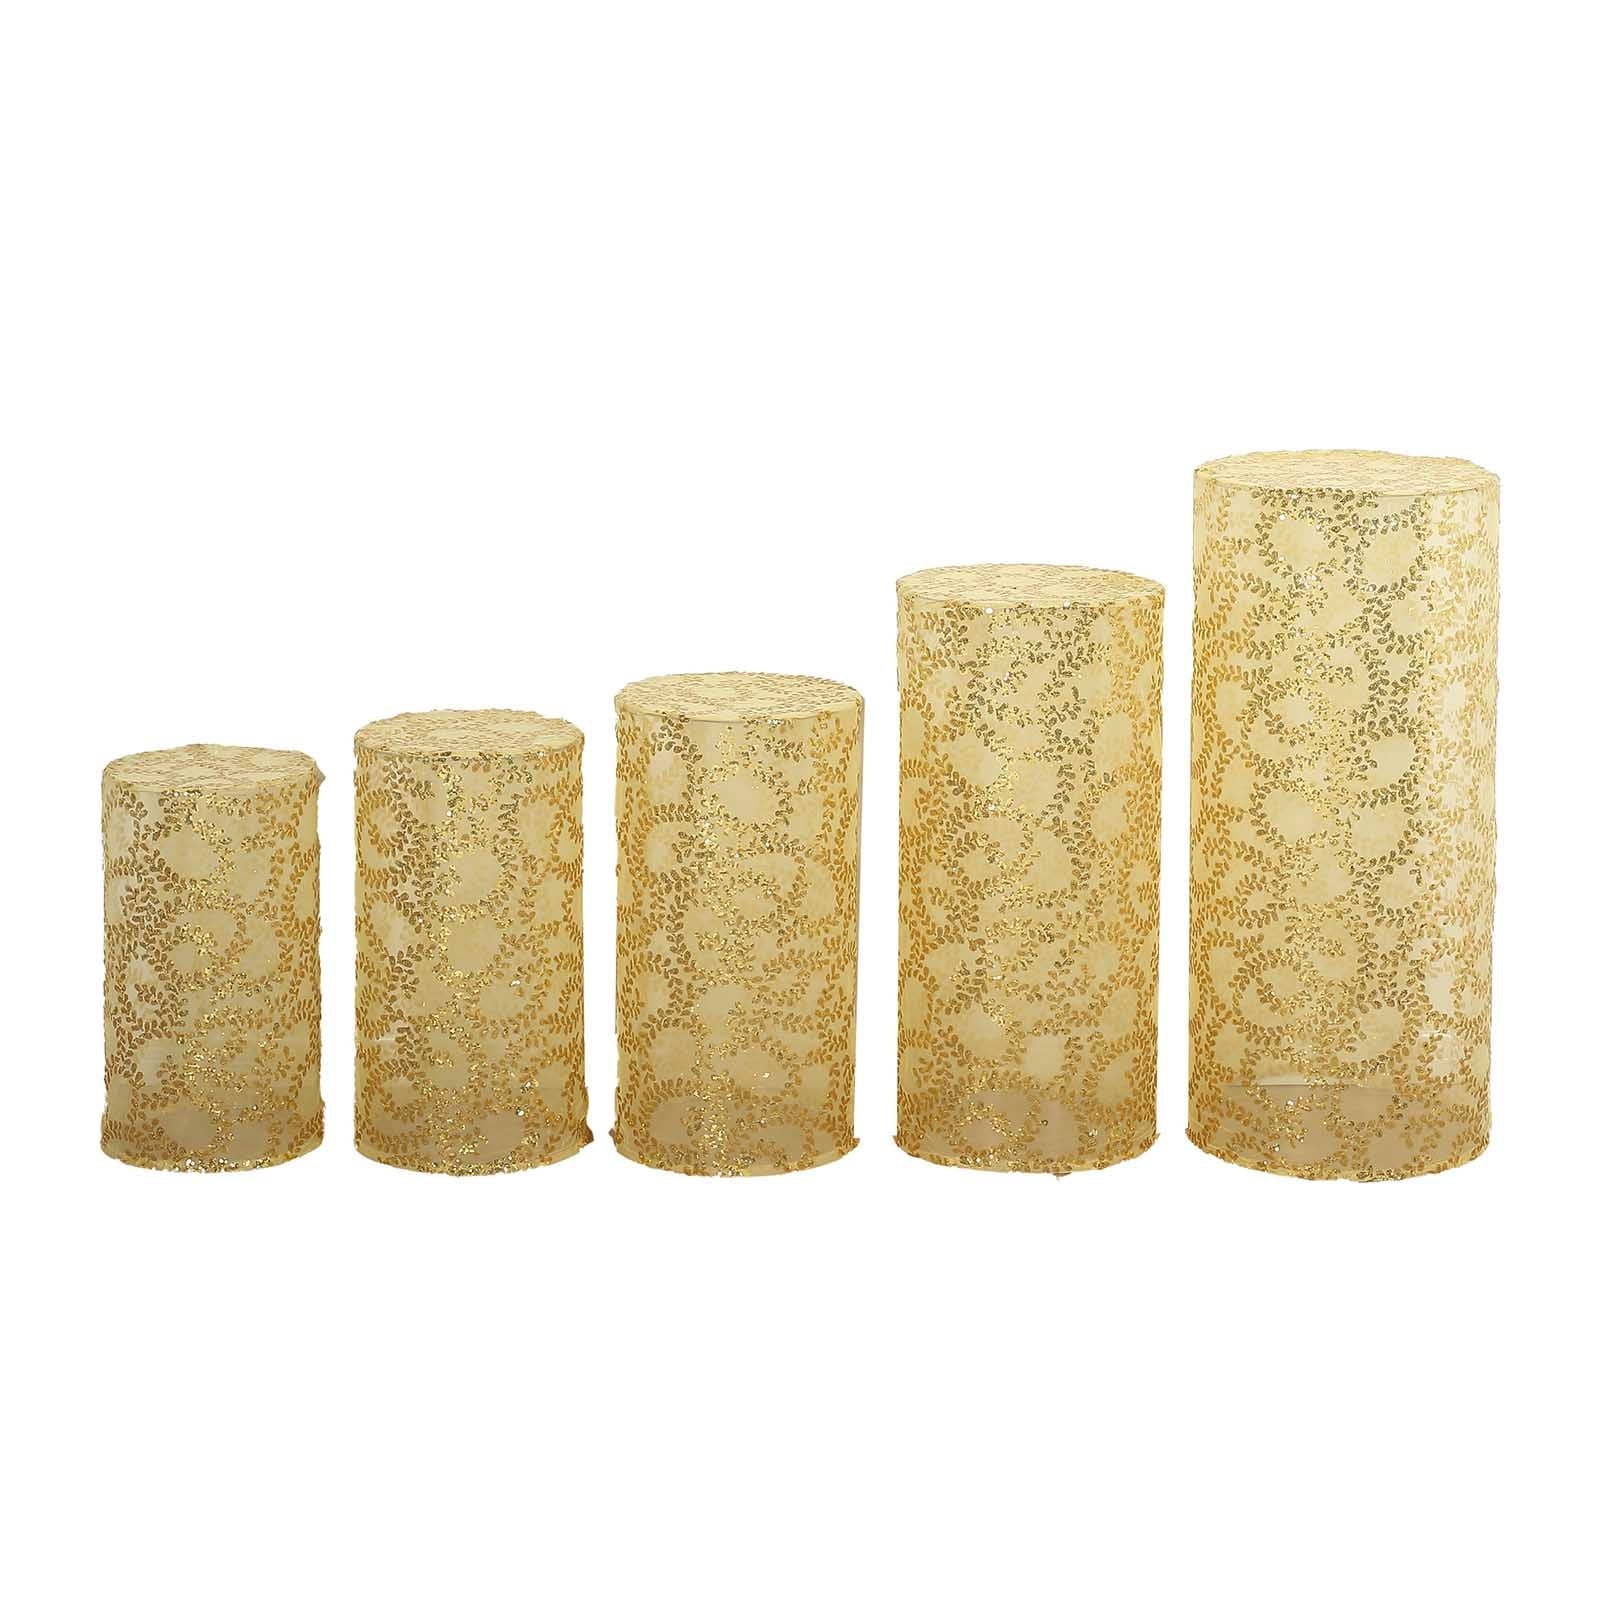 5 Sequin Mesh Cylinder Display Box Stand Covers with Leaf Vine Embroidery PROP_BOX_006_02_FLOR_GOLD